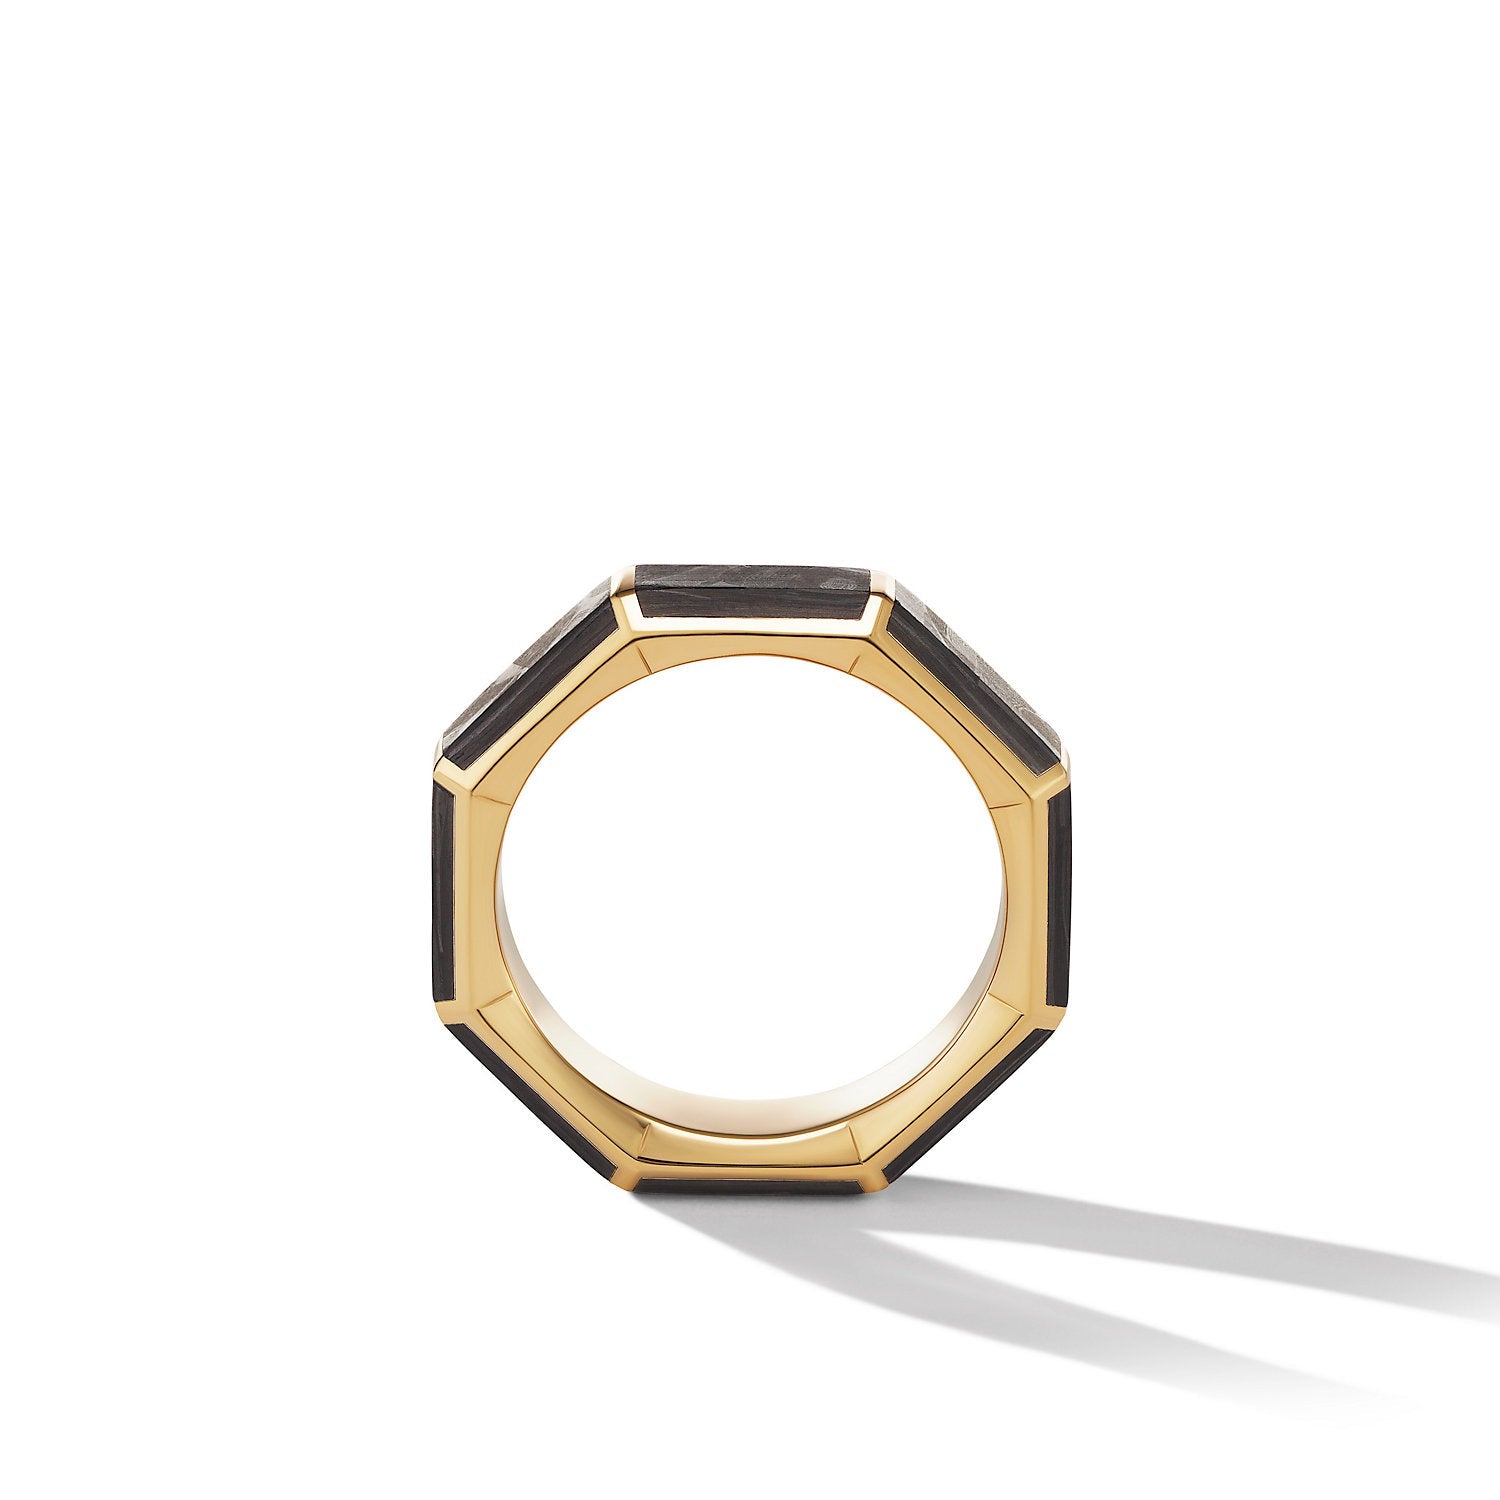 FORGED CARBON FACETED BAND RING WITH 18K YELLOW GOLD